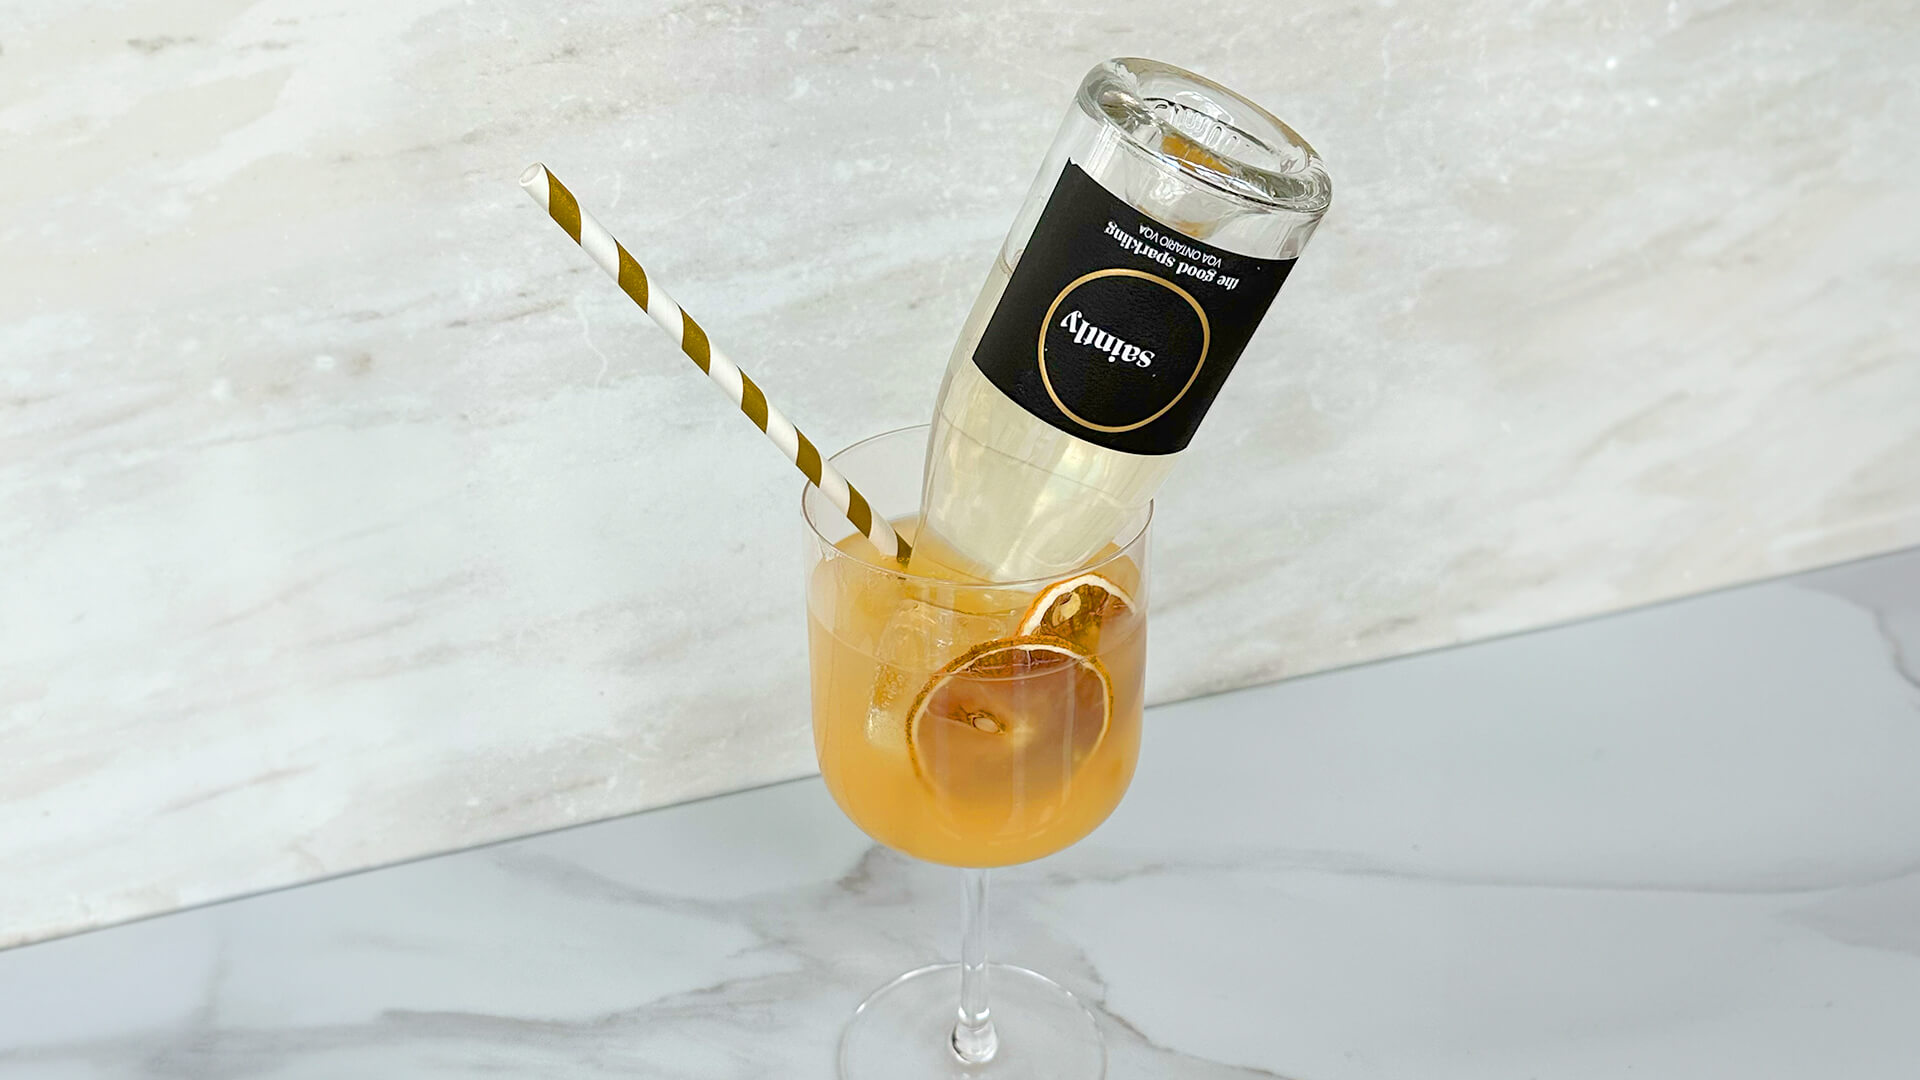 Sparkling Pear Mimosa cocktail.